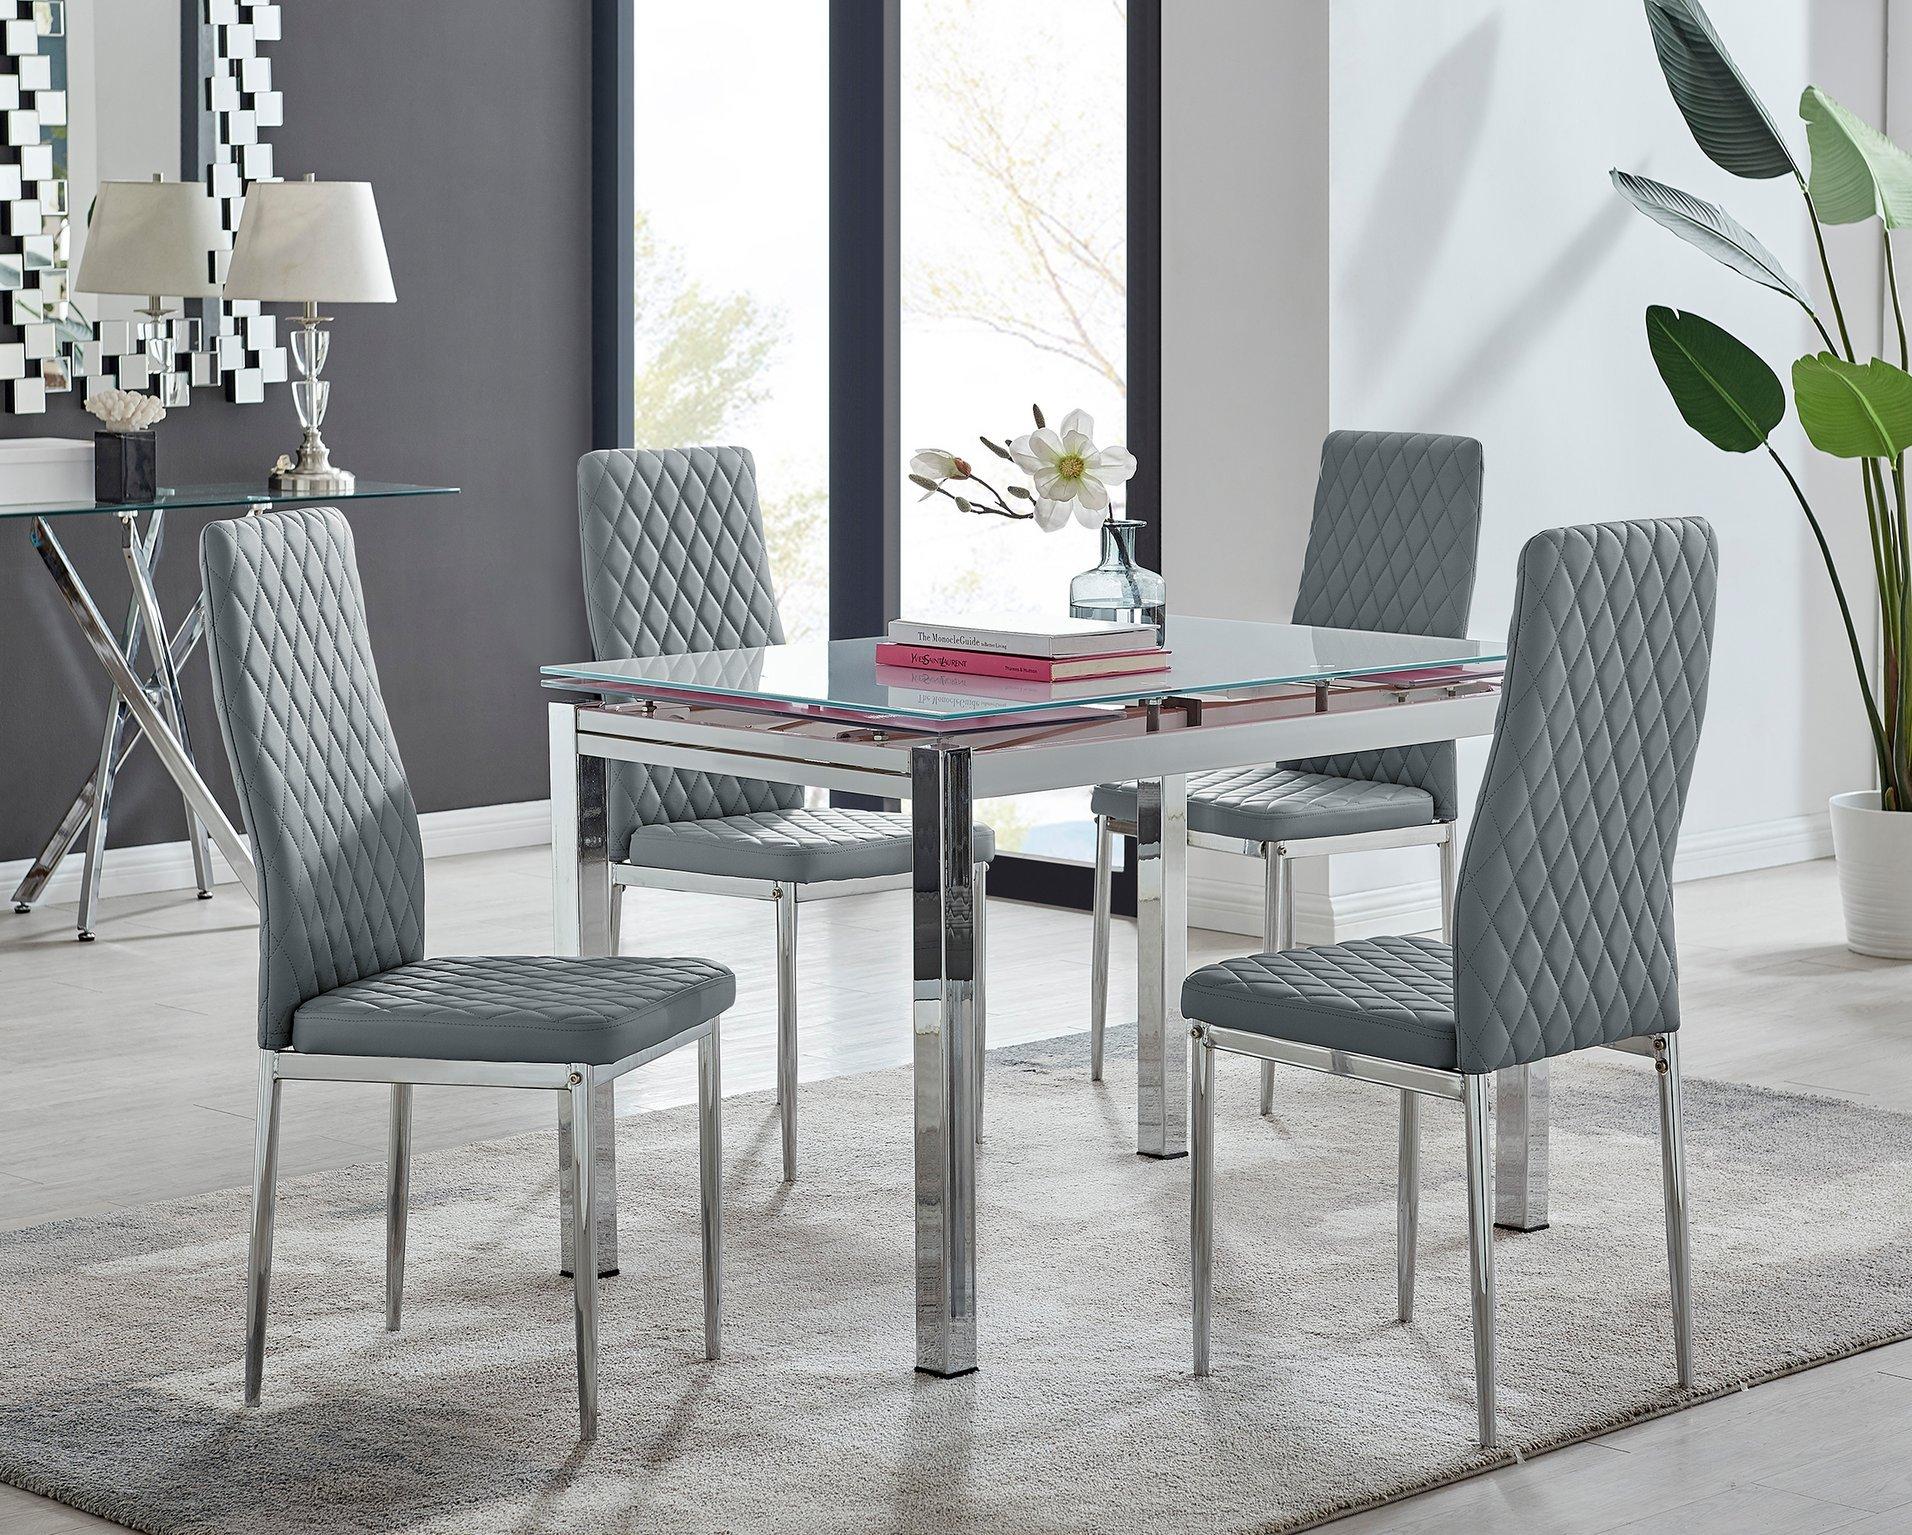 Enna White Glass Extending 4-6 Seater Dining Table and 4 Milan Faux Leather Chairs